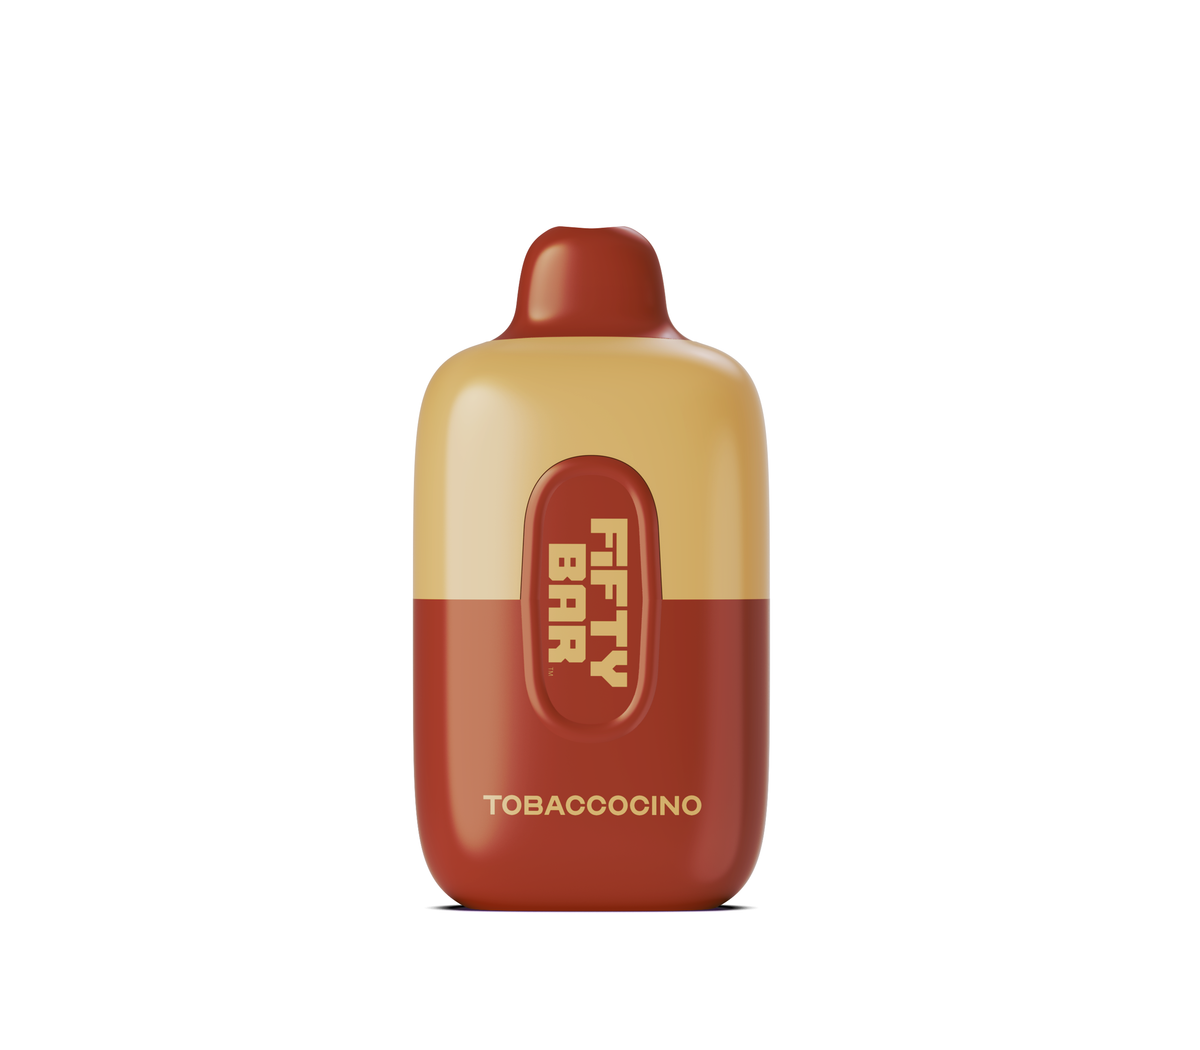 Tobaccocino by Fifty Bar